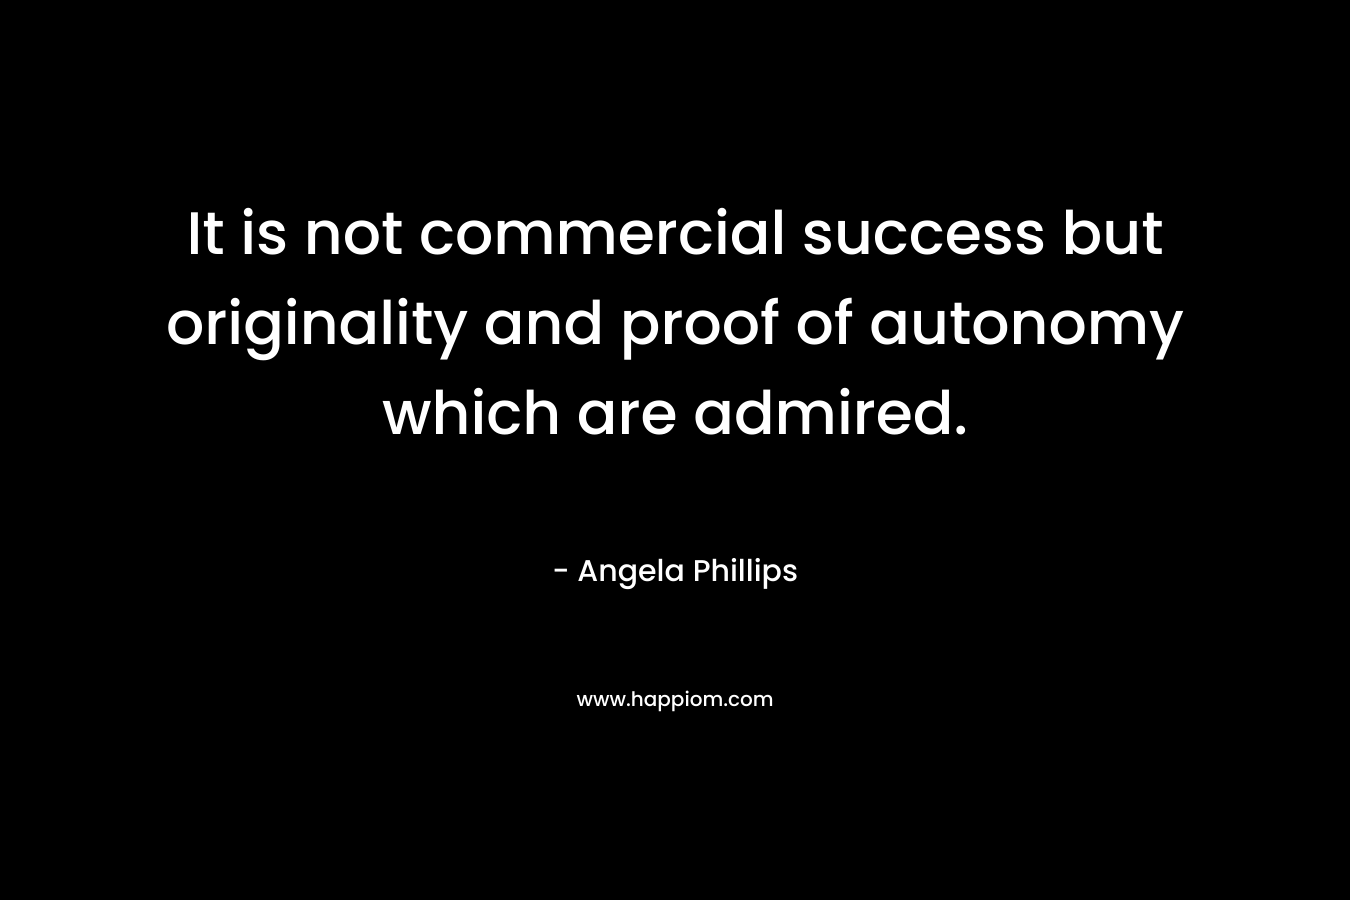 It is not commercial success but originality and proof of autonomy which are admired. – Angela Phillips